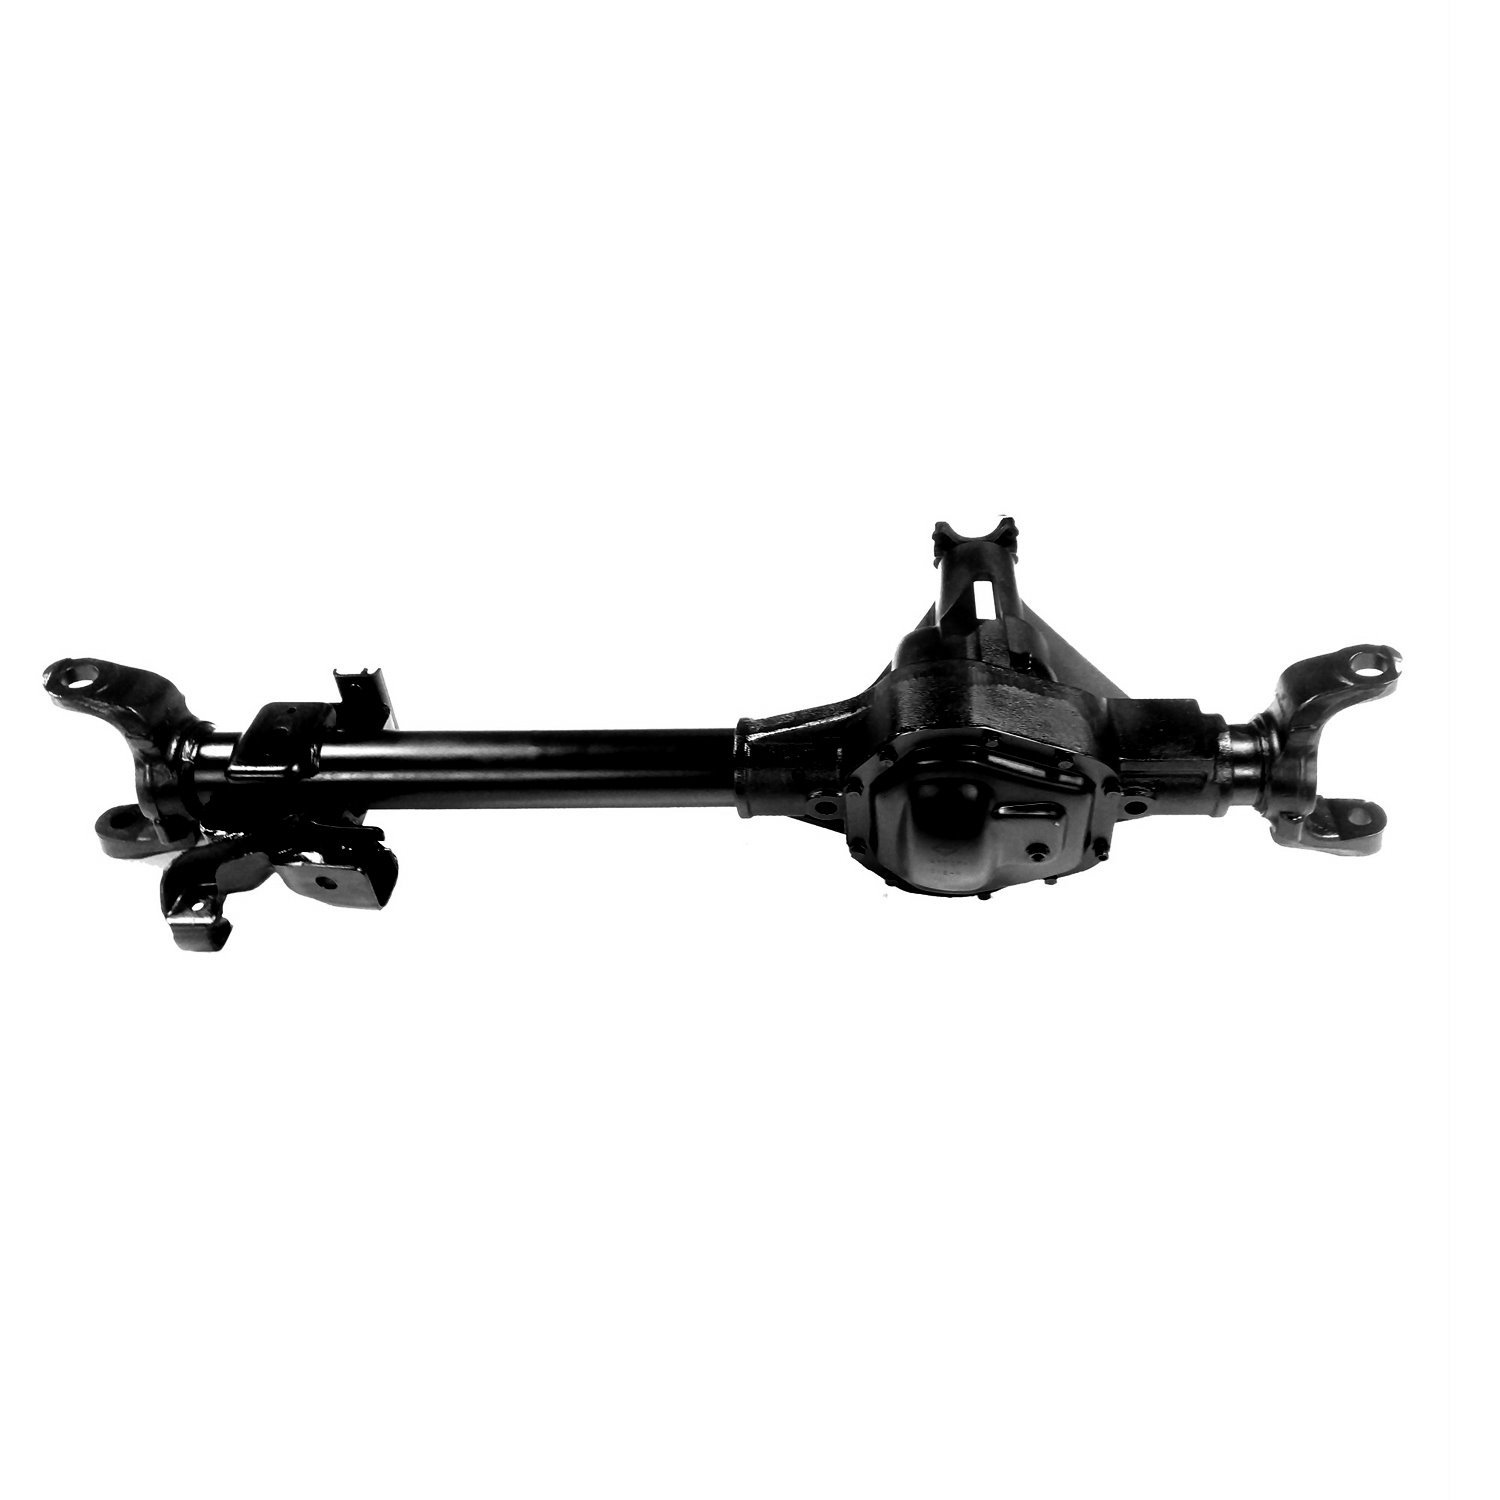 Remanufactured Complete Axle Assembly for Dana 60 2005 Ford F250 & F350 3.73 Ratio